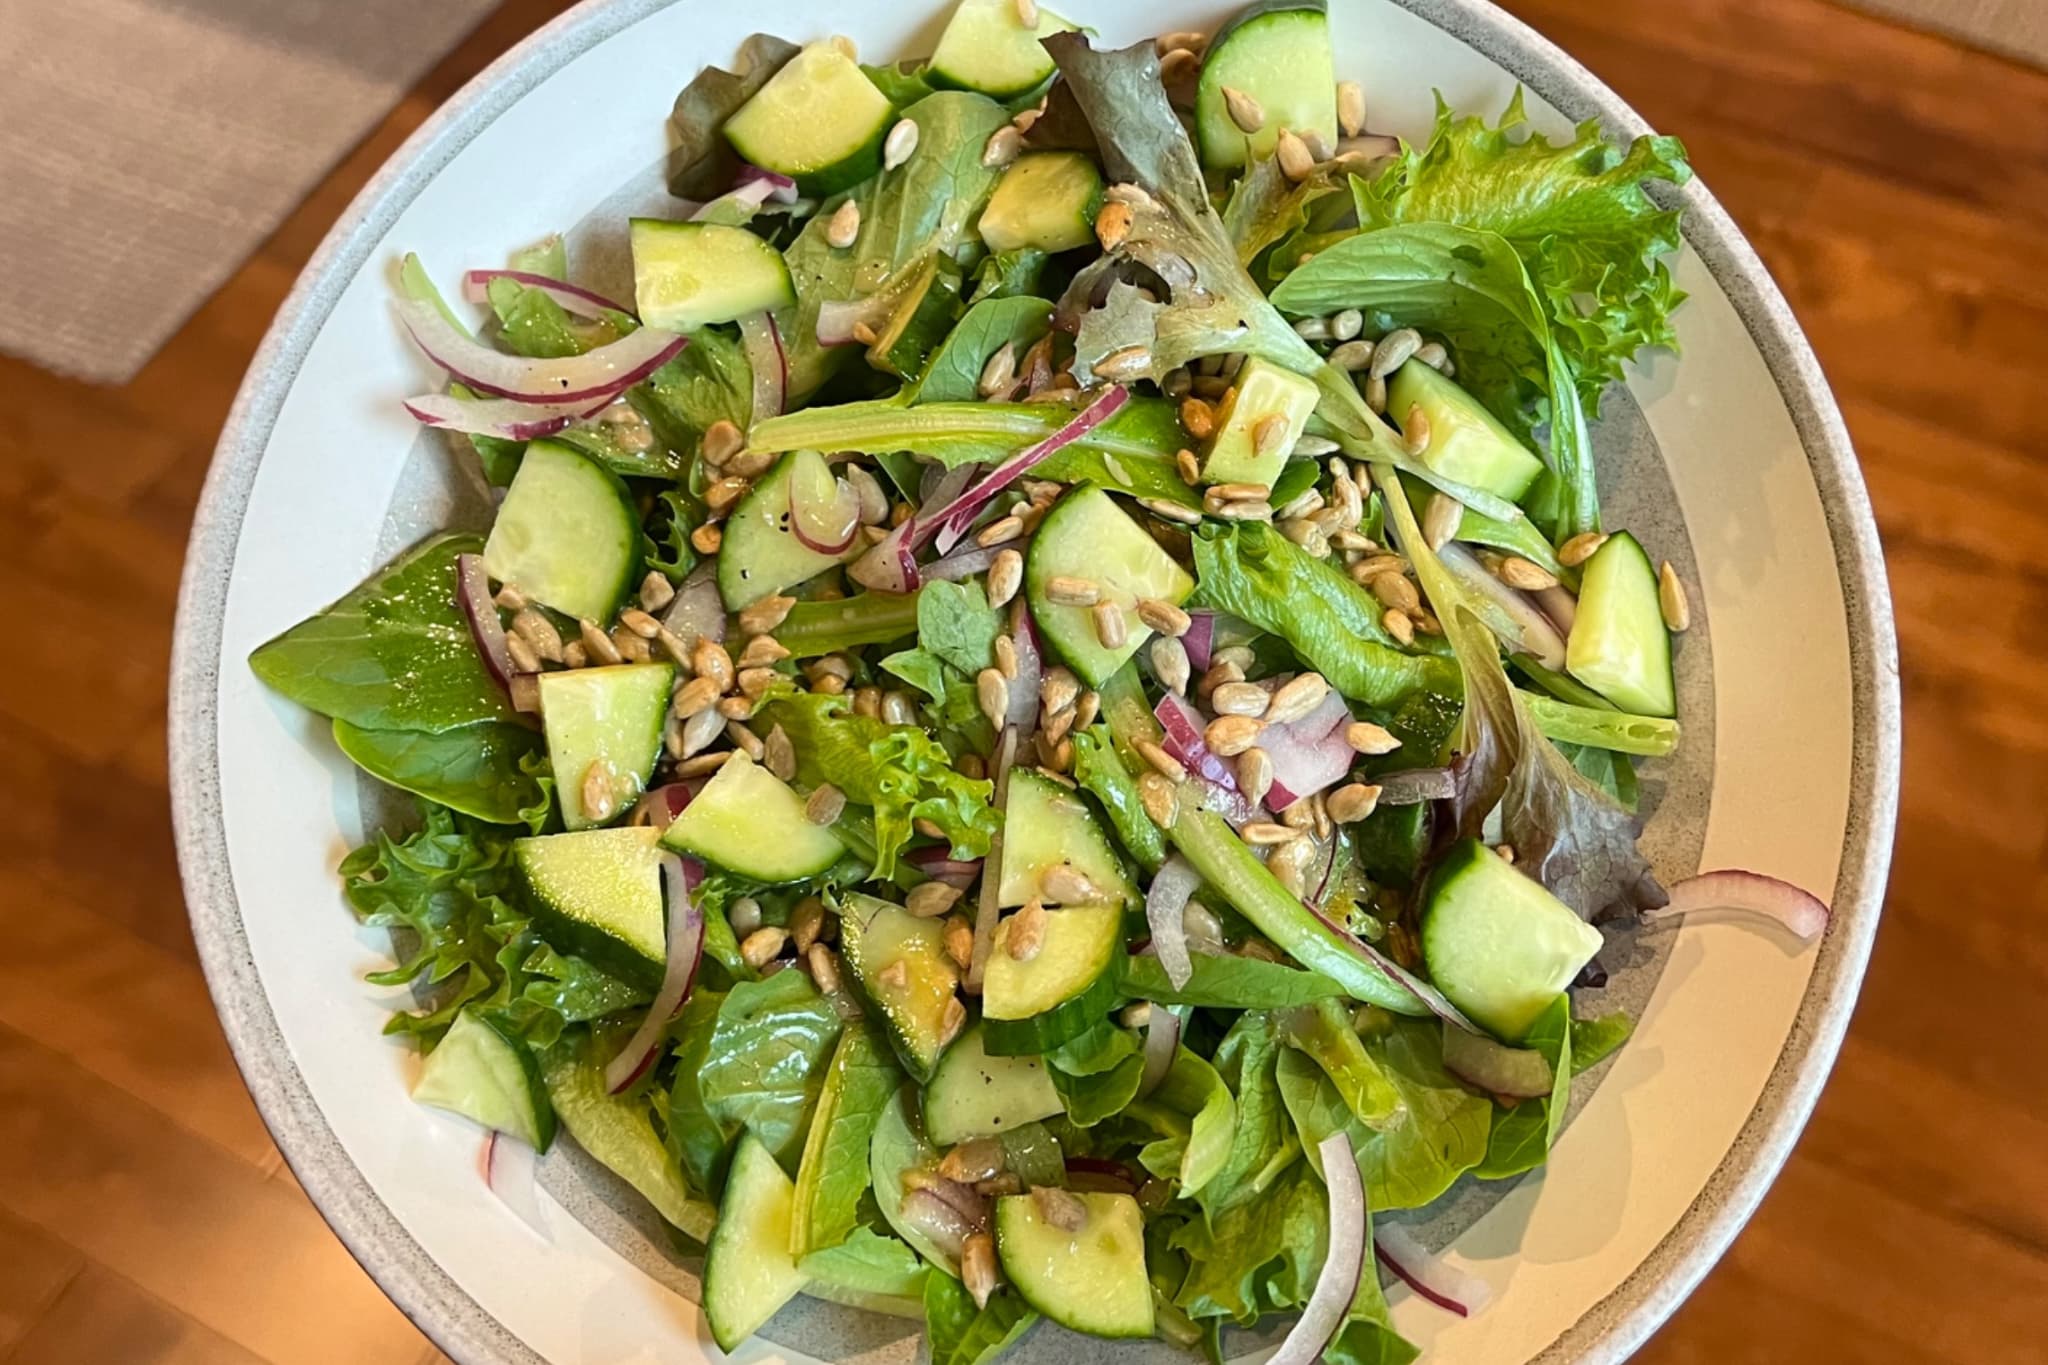 https://realfoodwell.com/wp-content/uploads/2023/09/Simple-Mixed-Greens-Salad-Final-1-rc.jpg